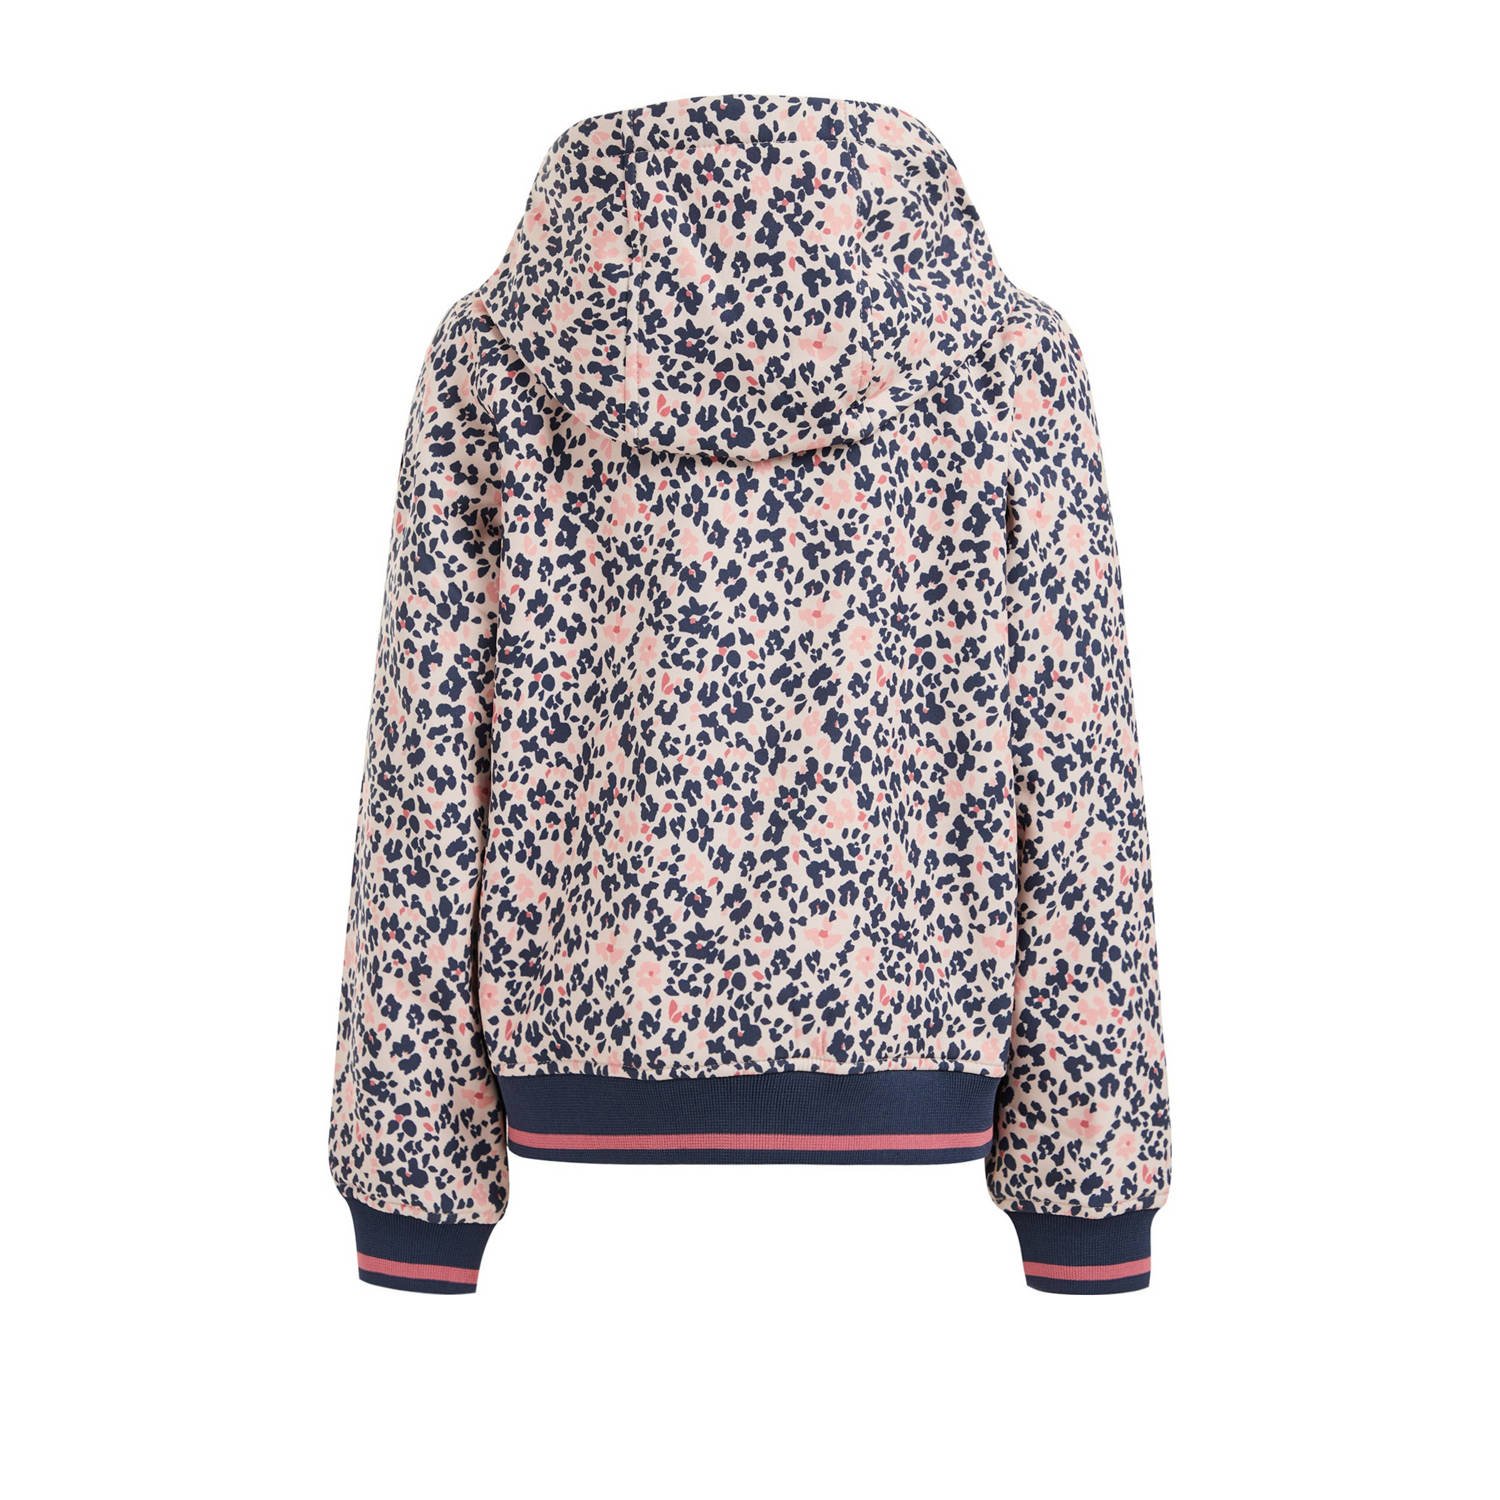 WE Fashion softshell jas met all over print roze donkerblauw